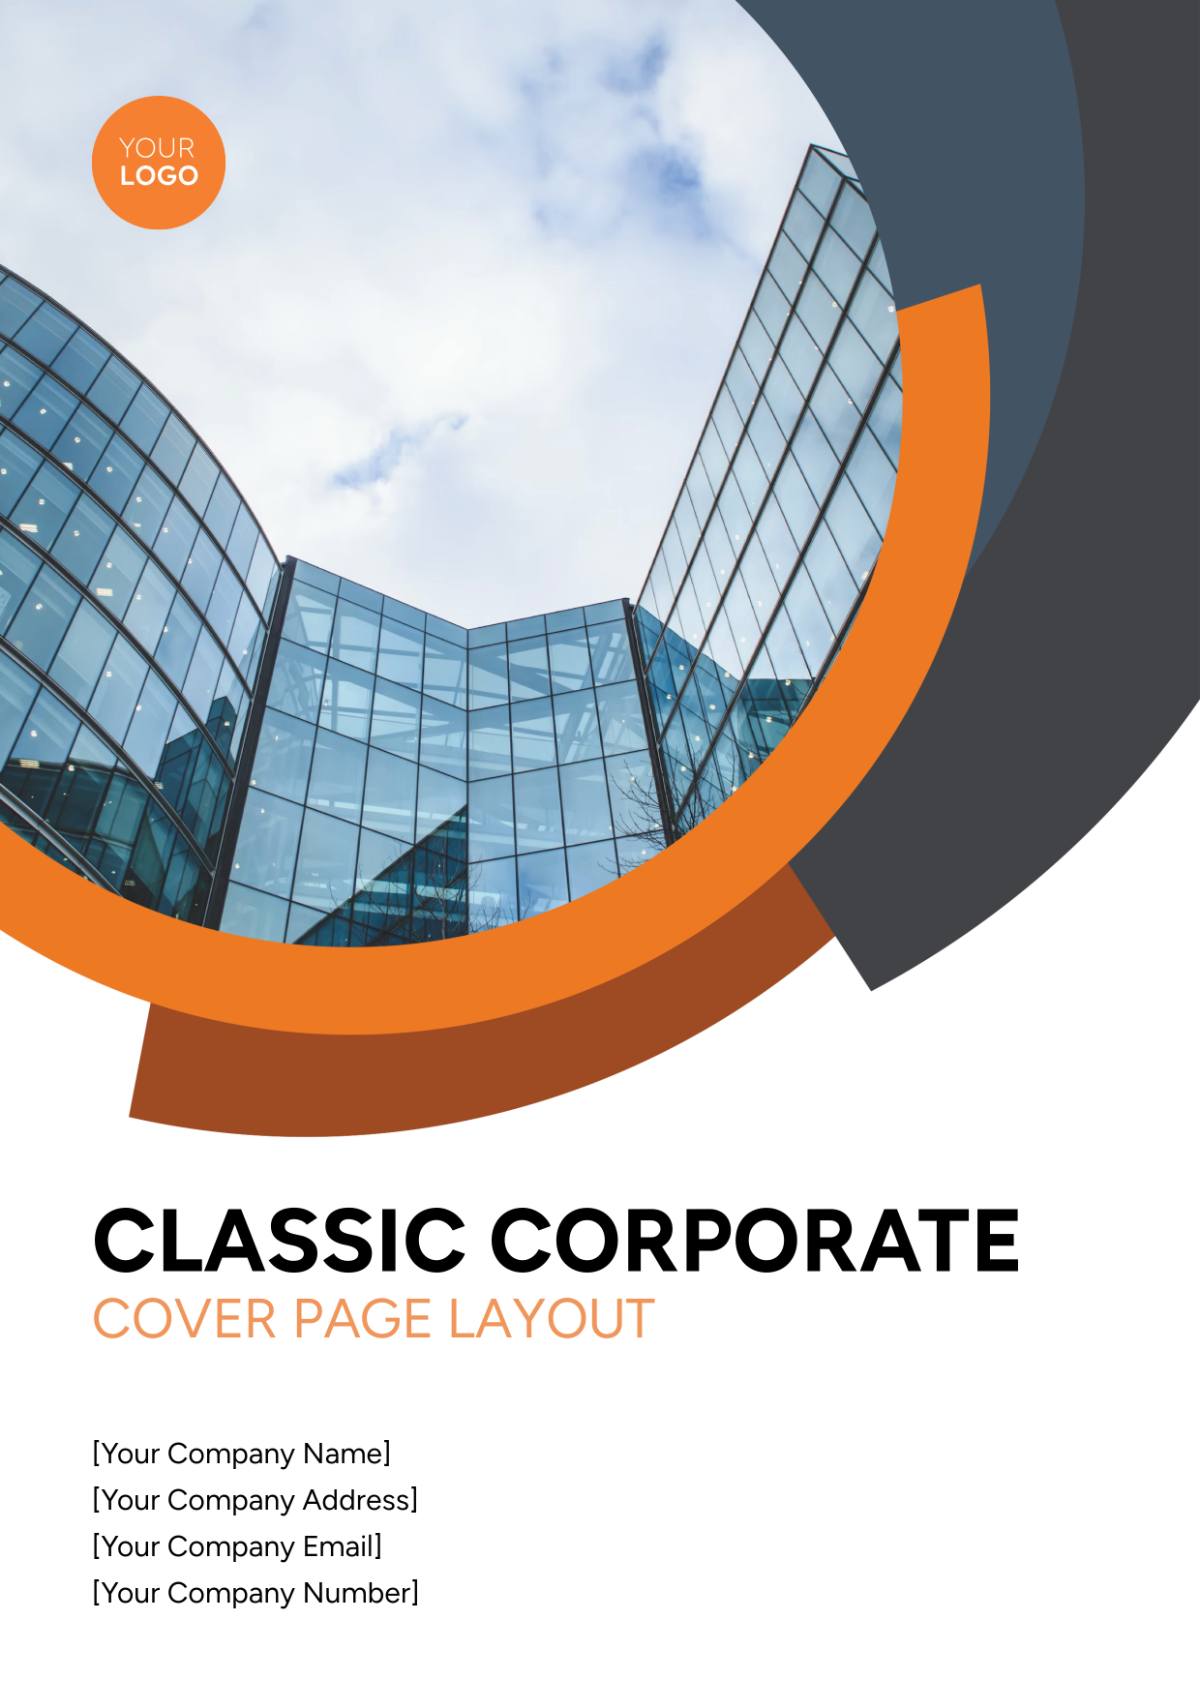 Classic Corporate Cover Page Layout